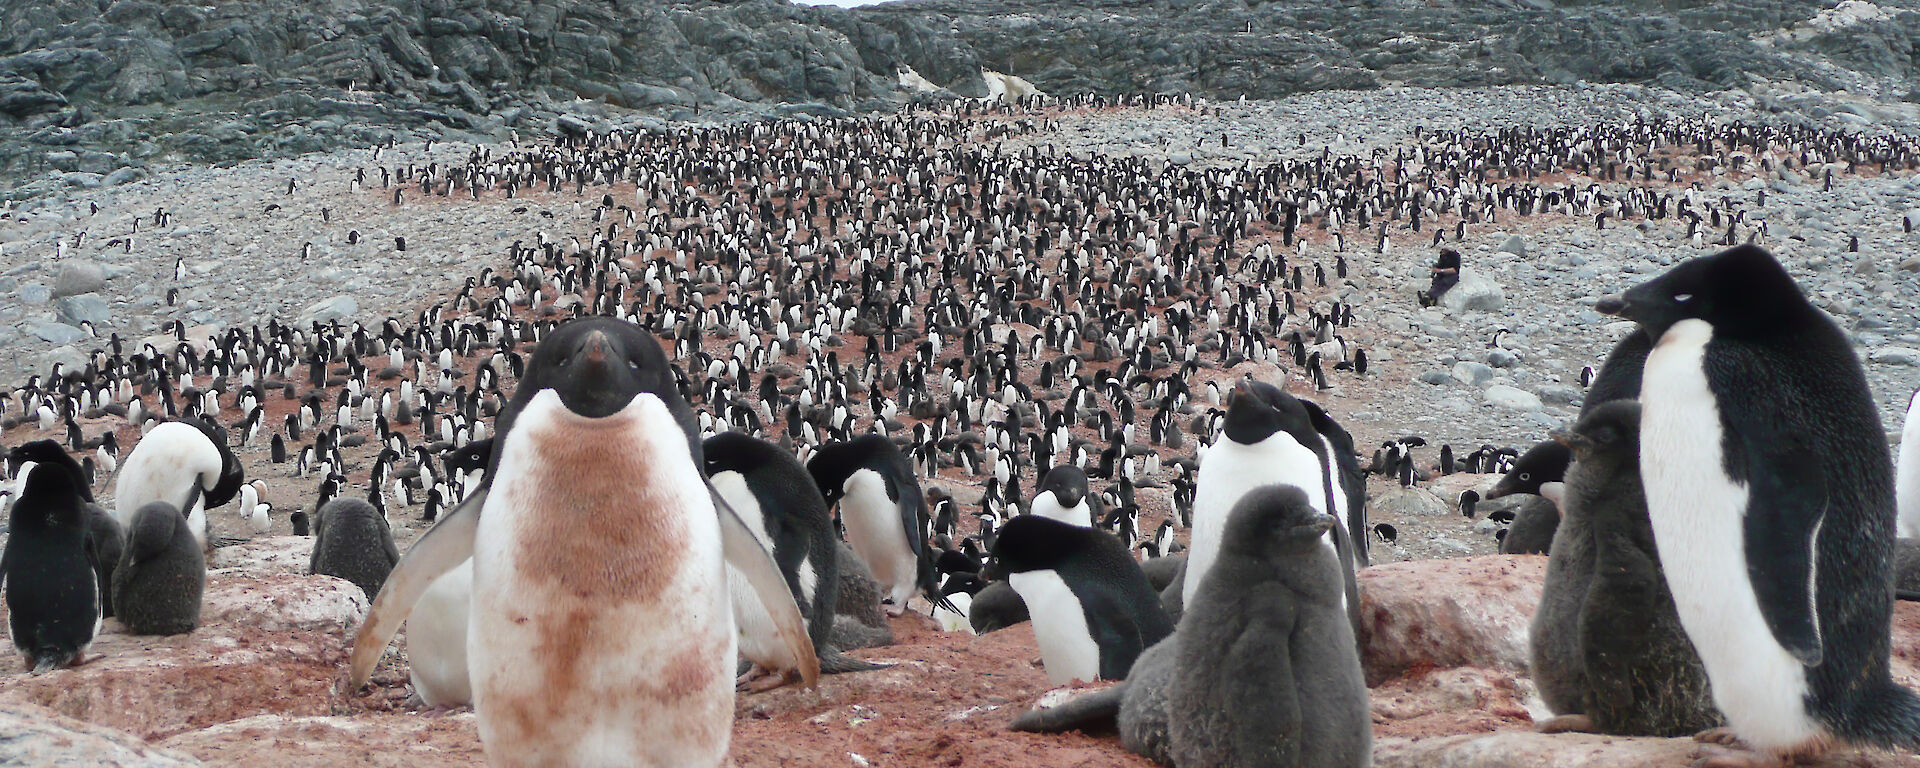 An Adélie penguin colony stained pink from eating krill.